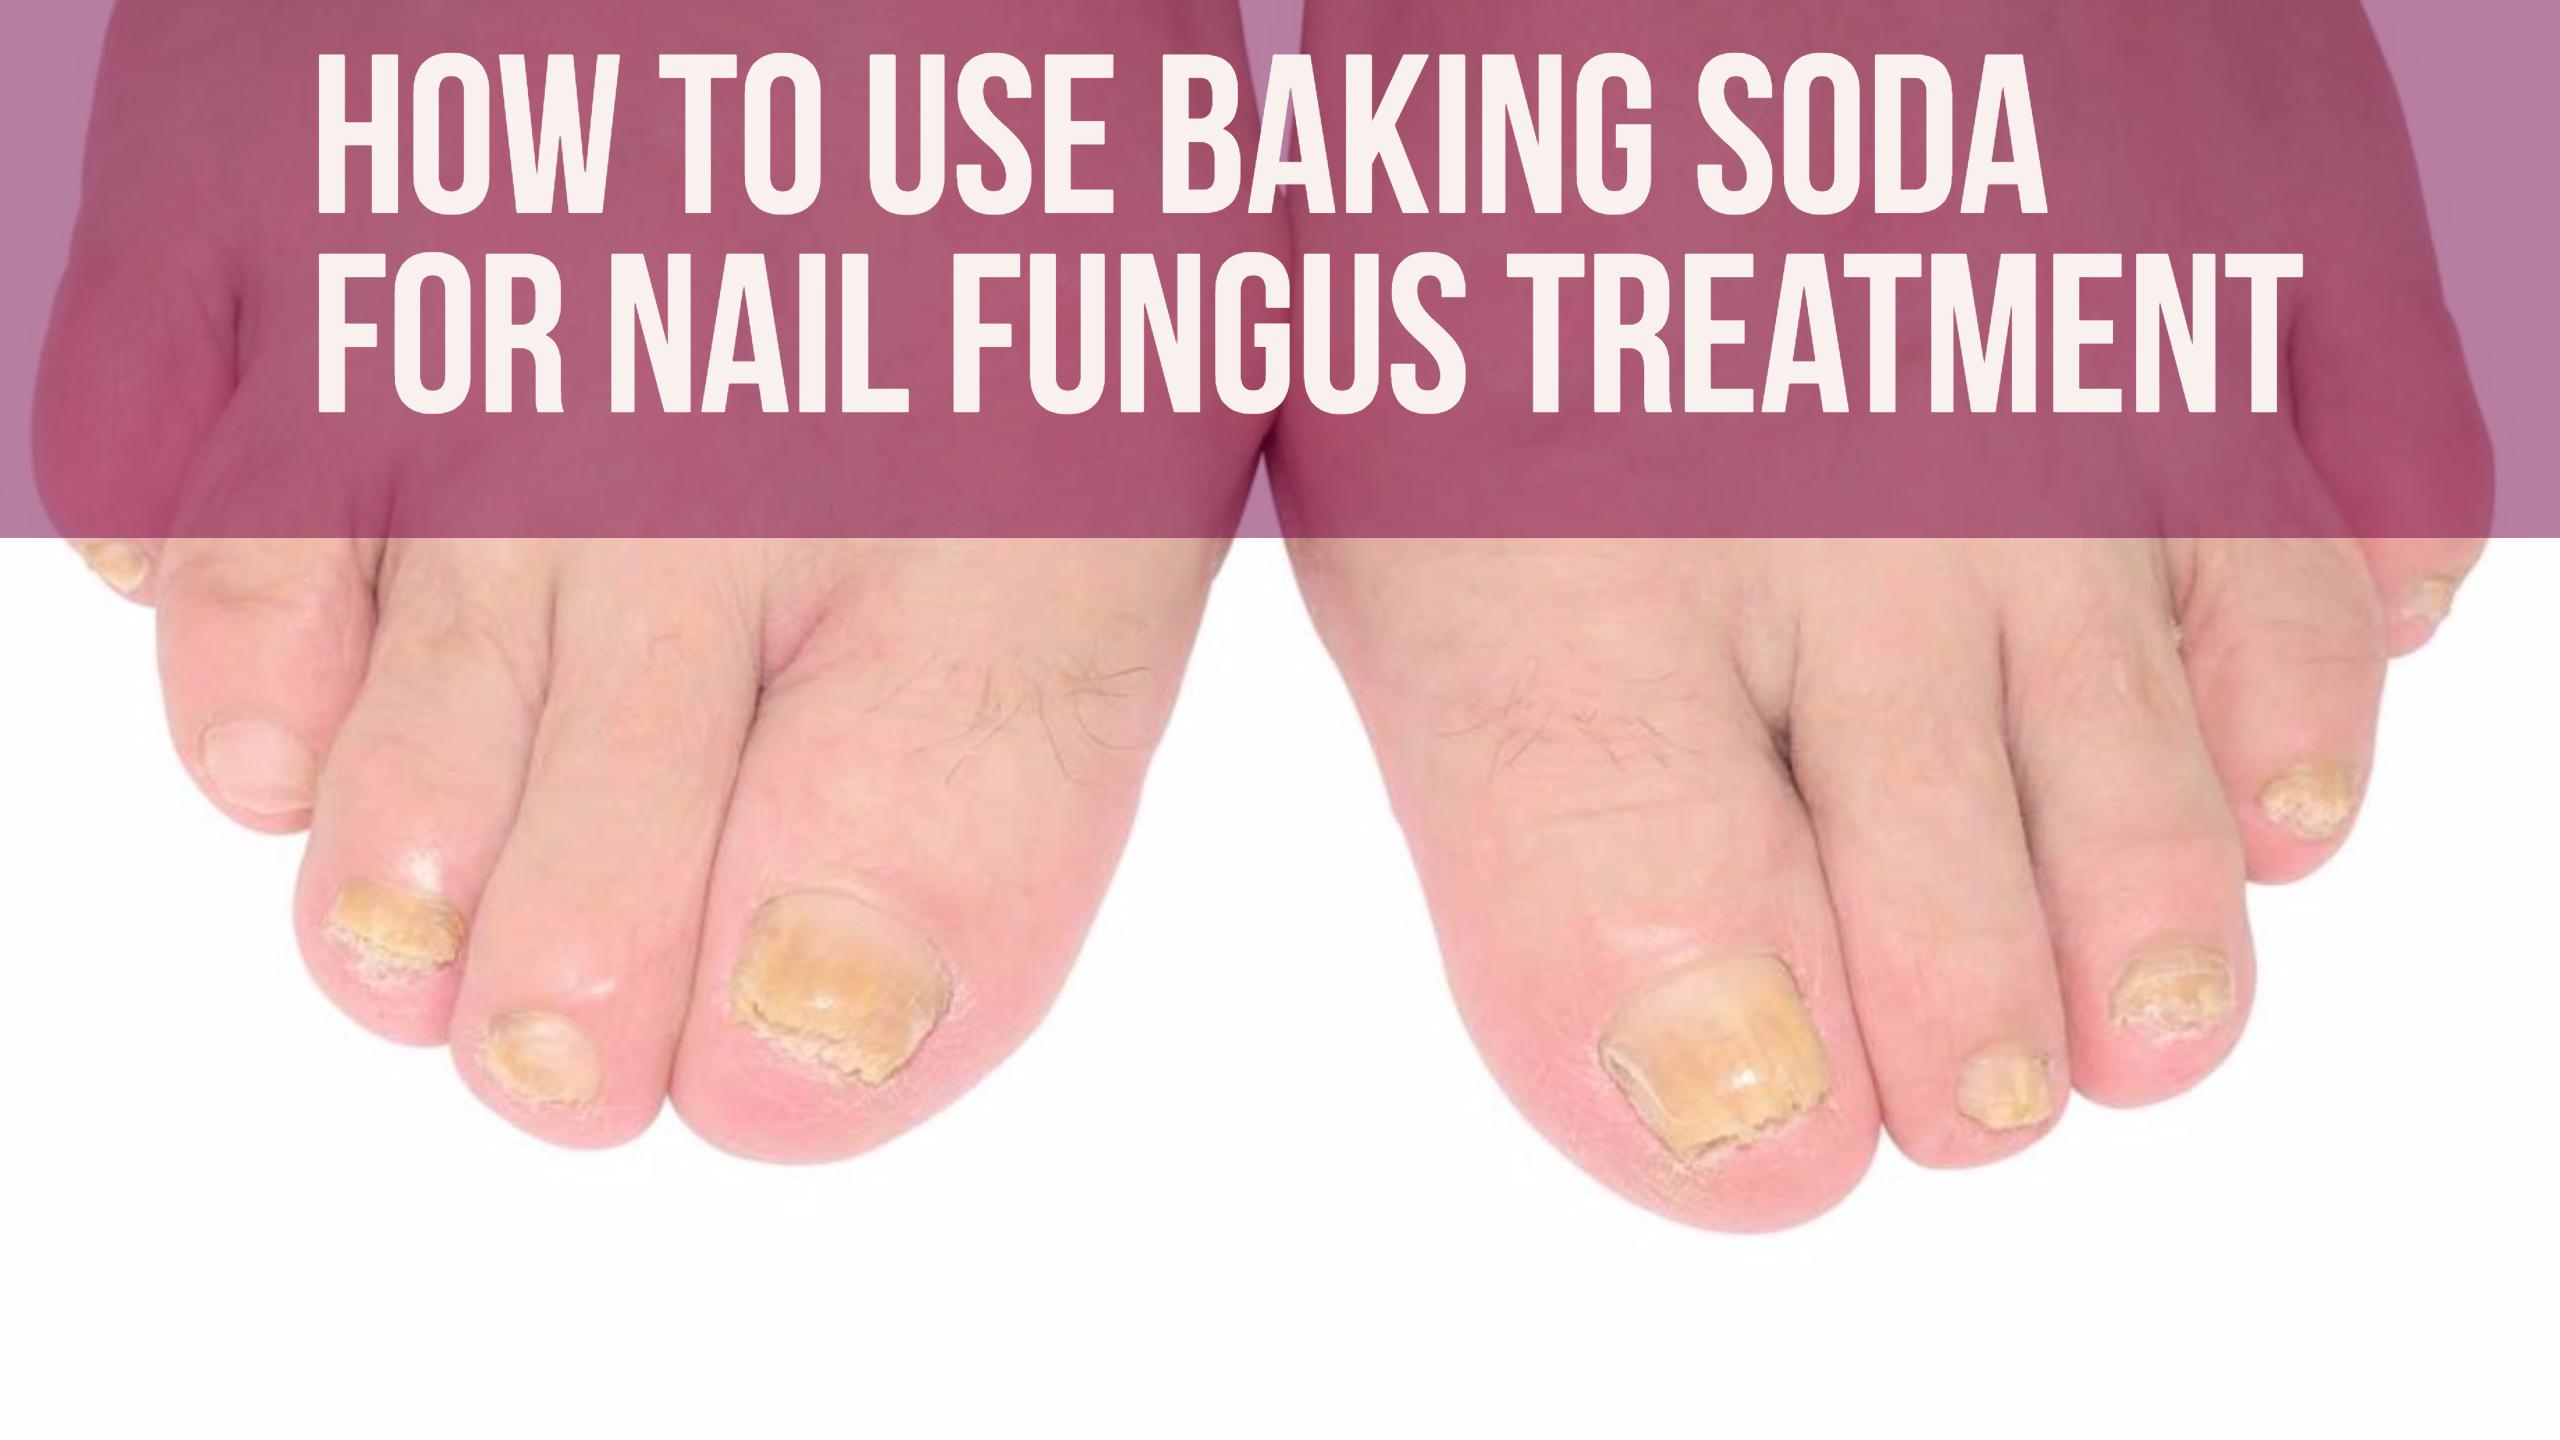 Is vinegar a cure for foot fungus?